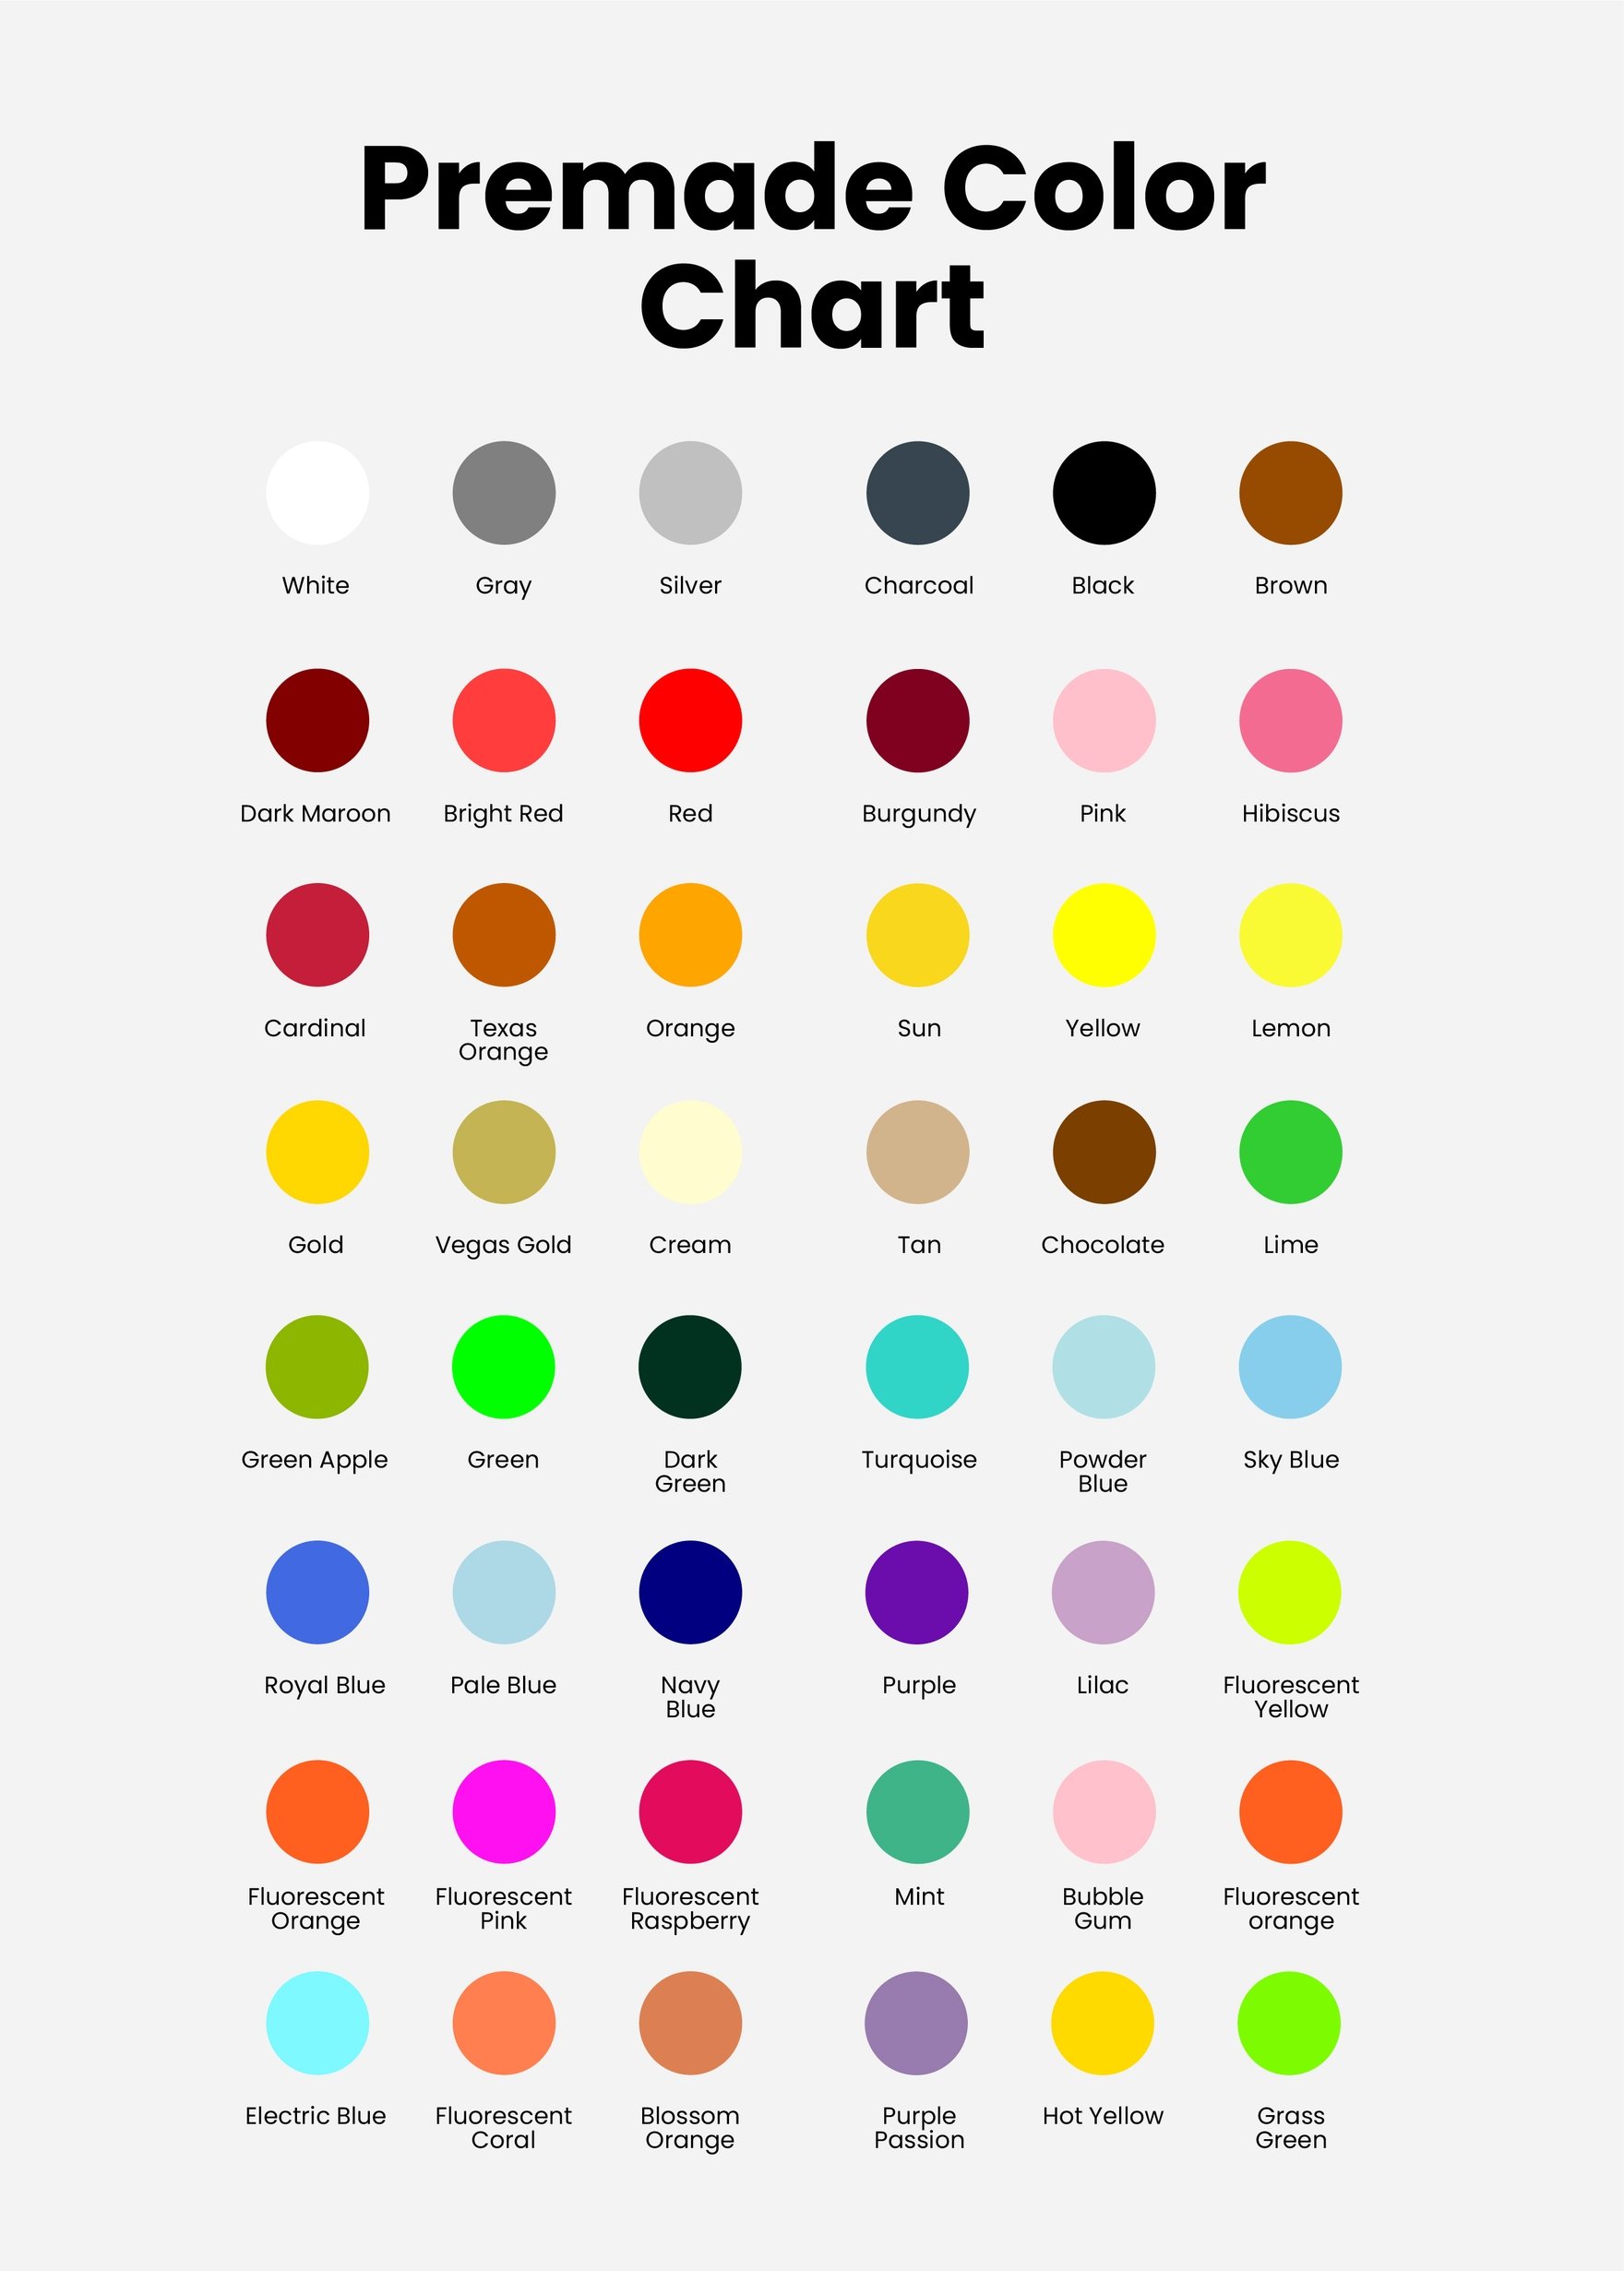 Premade Color Chart